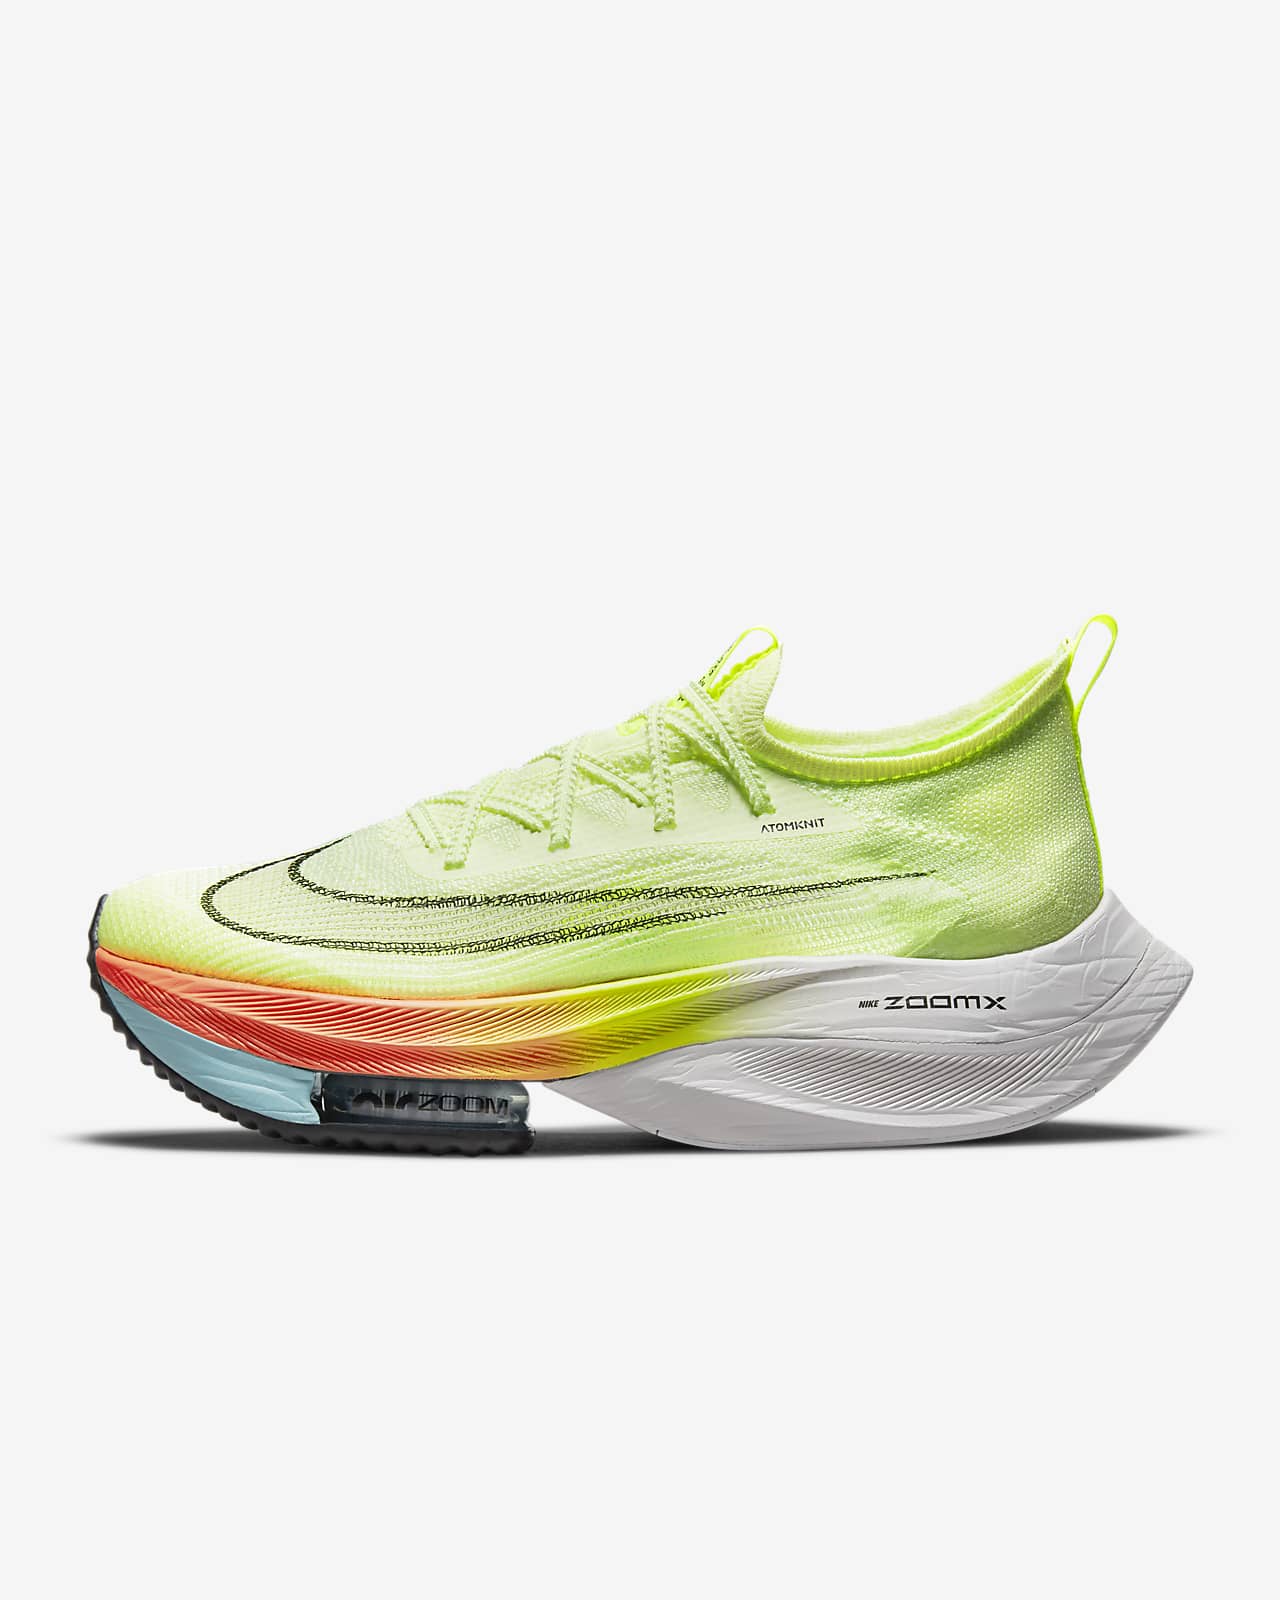 Nike Air Zoom Alphafly Next% Barely Volt - Size 11 Men